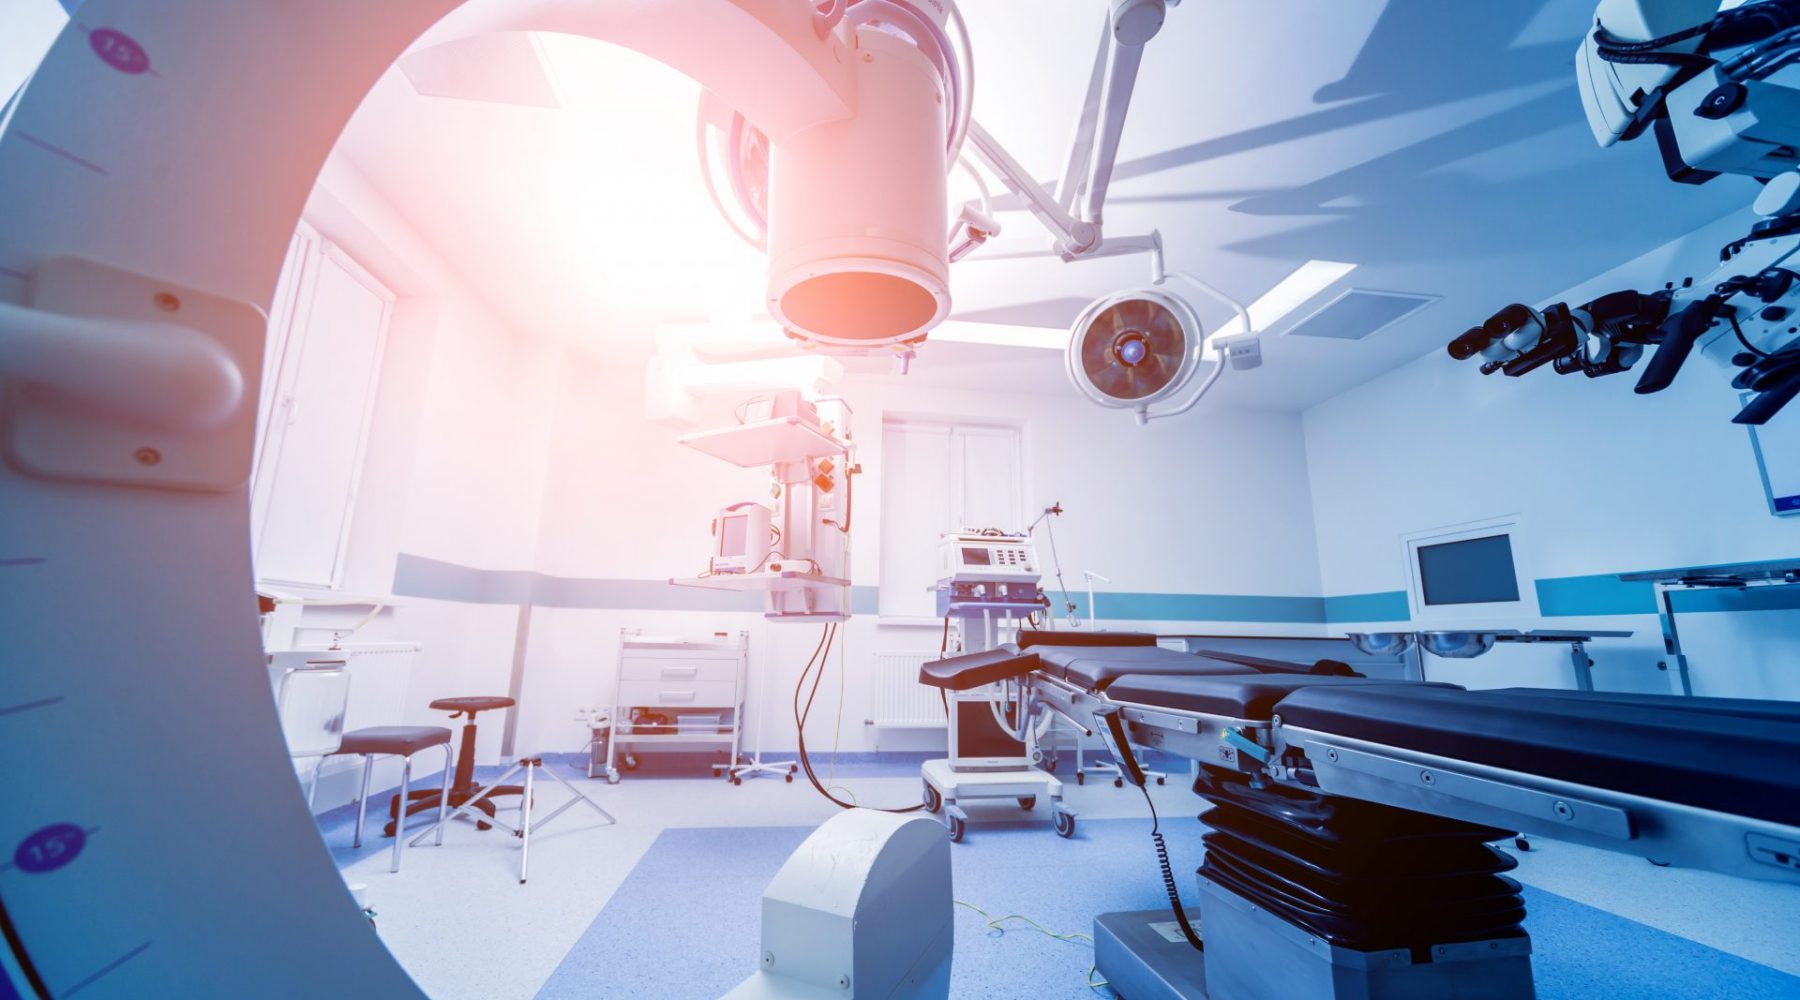 modern-equipment-operating-room-medical-devices-neurosurgery